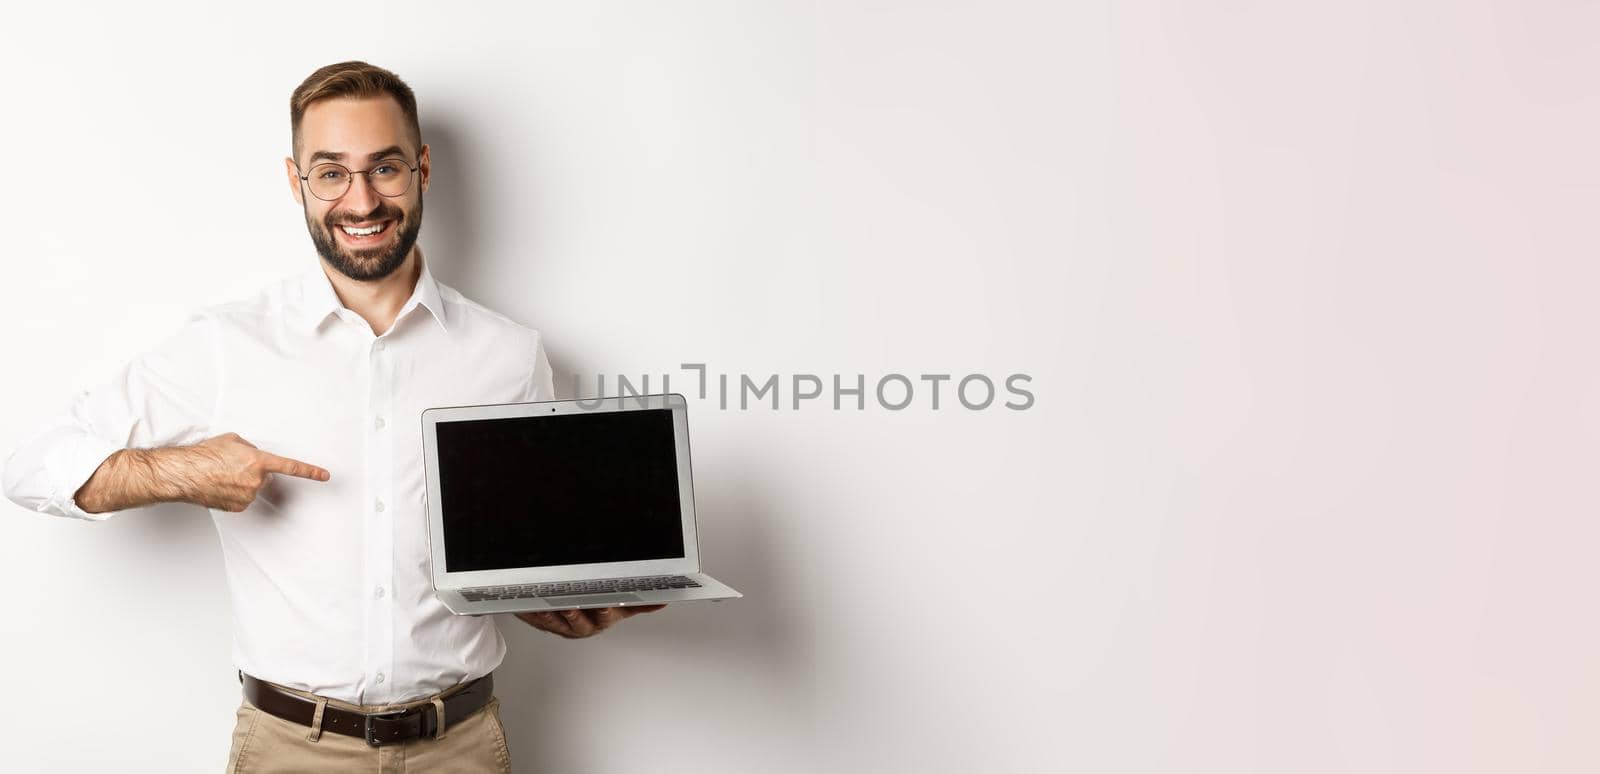 Professional manager showing webpage on laptop screen, pointing at computer, standing over white background.